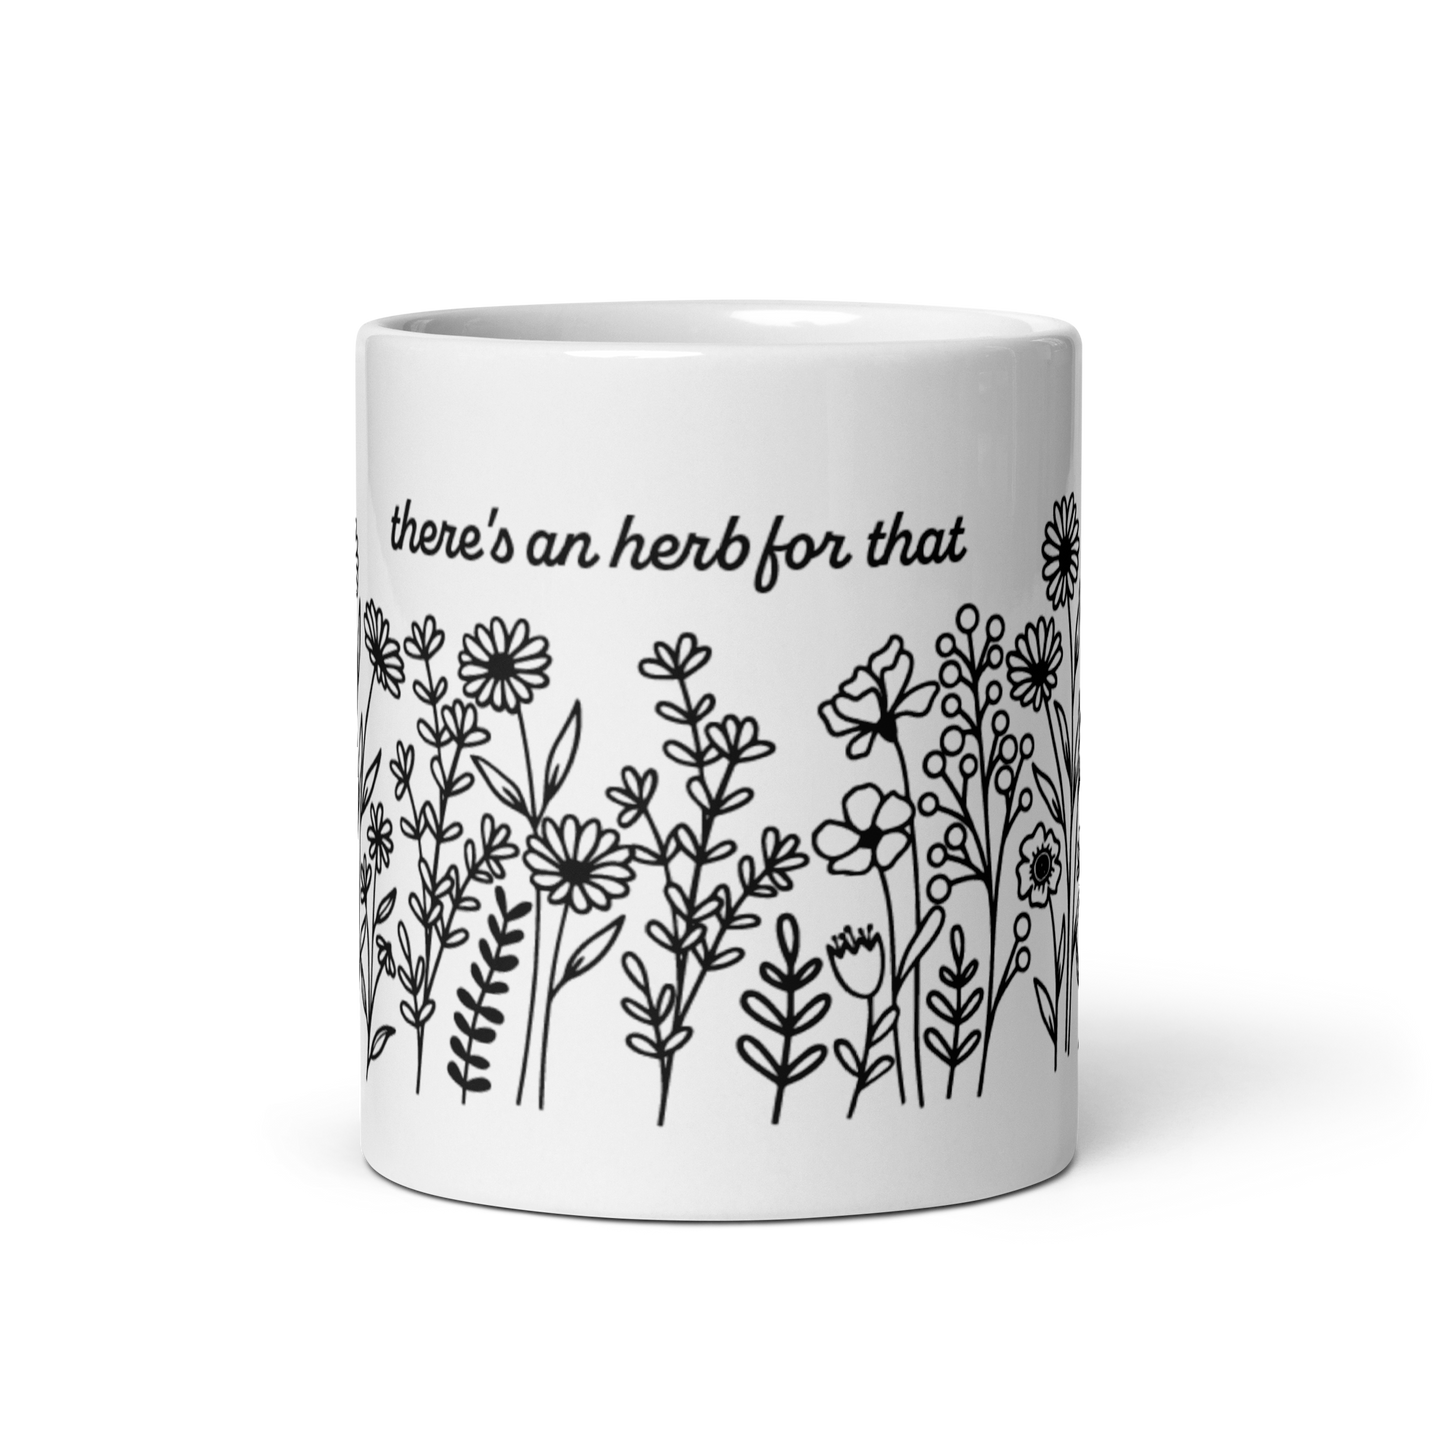 Ferry-Morse "There's an Herb for that" White Mug